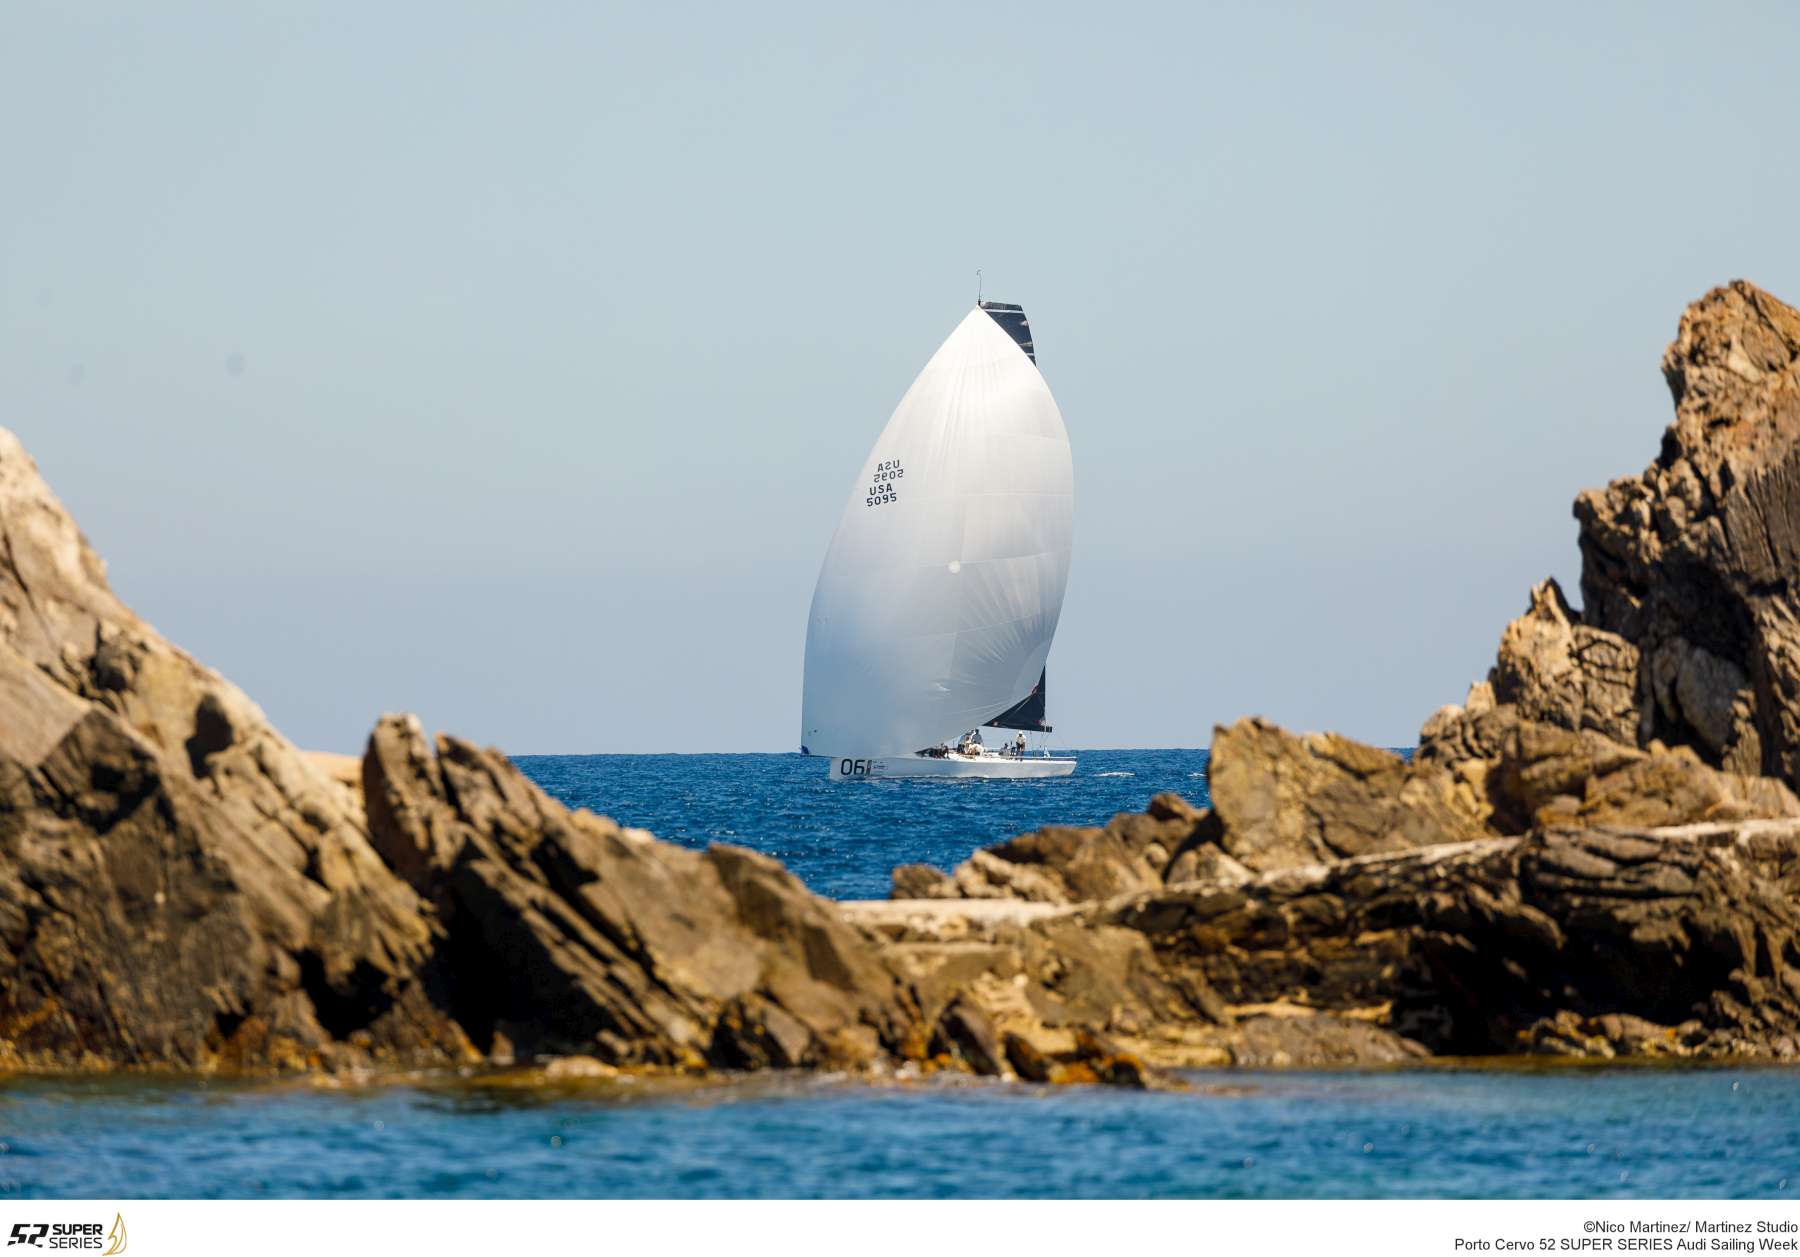 Sled takes the lead in the first day of racing at the Audi Sailing Week - 52 Super Series - NEWS - Yacht Club Costa Smeralda